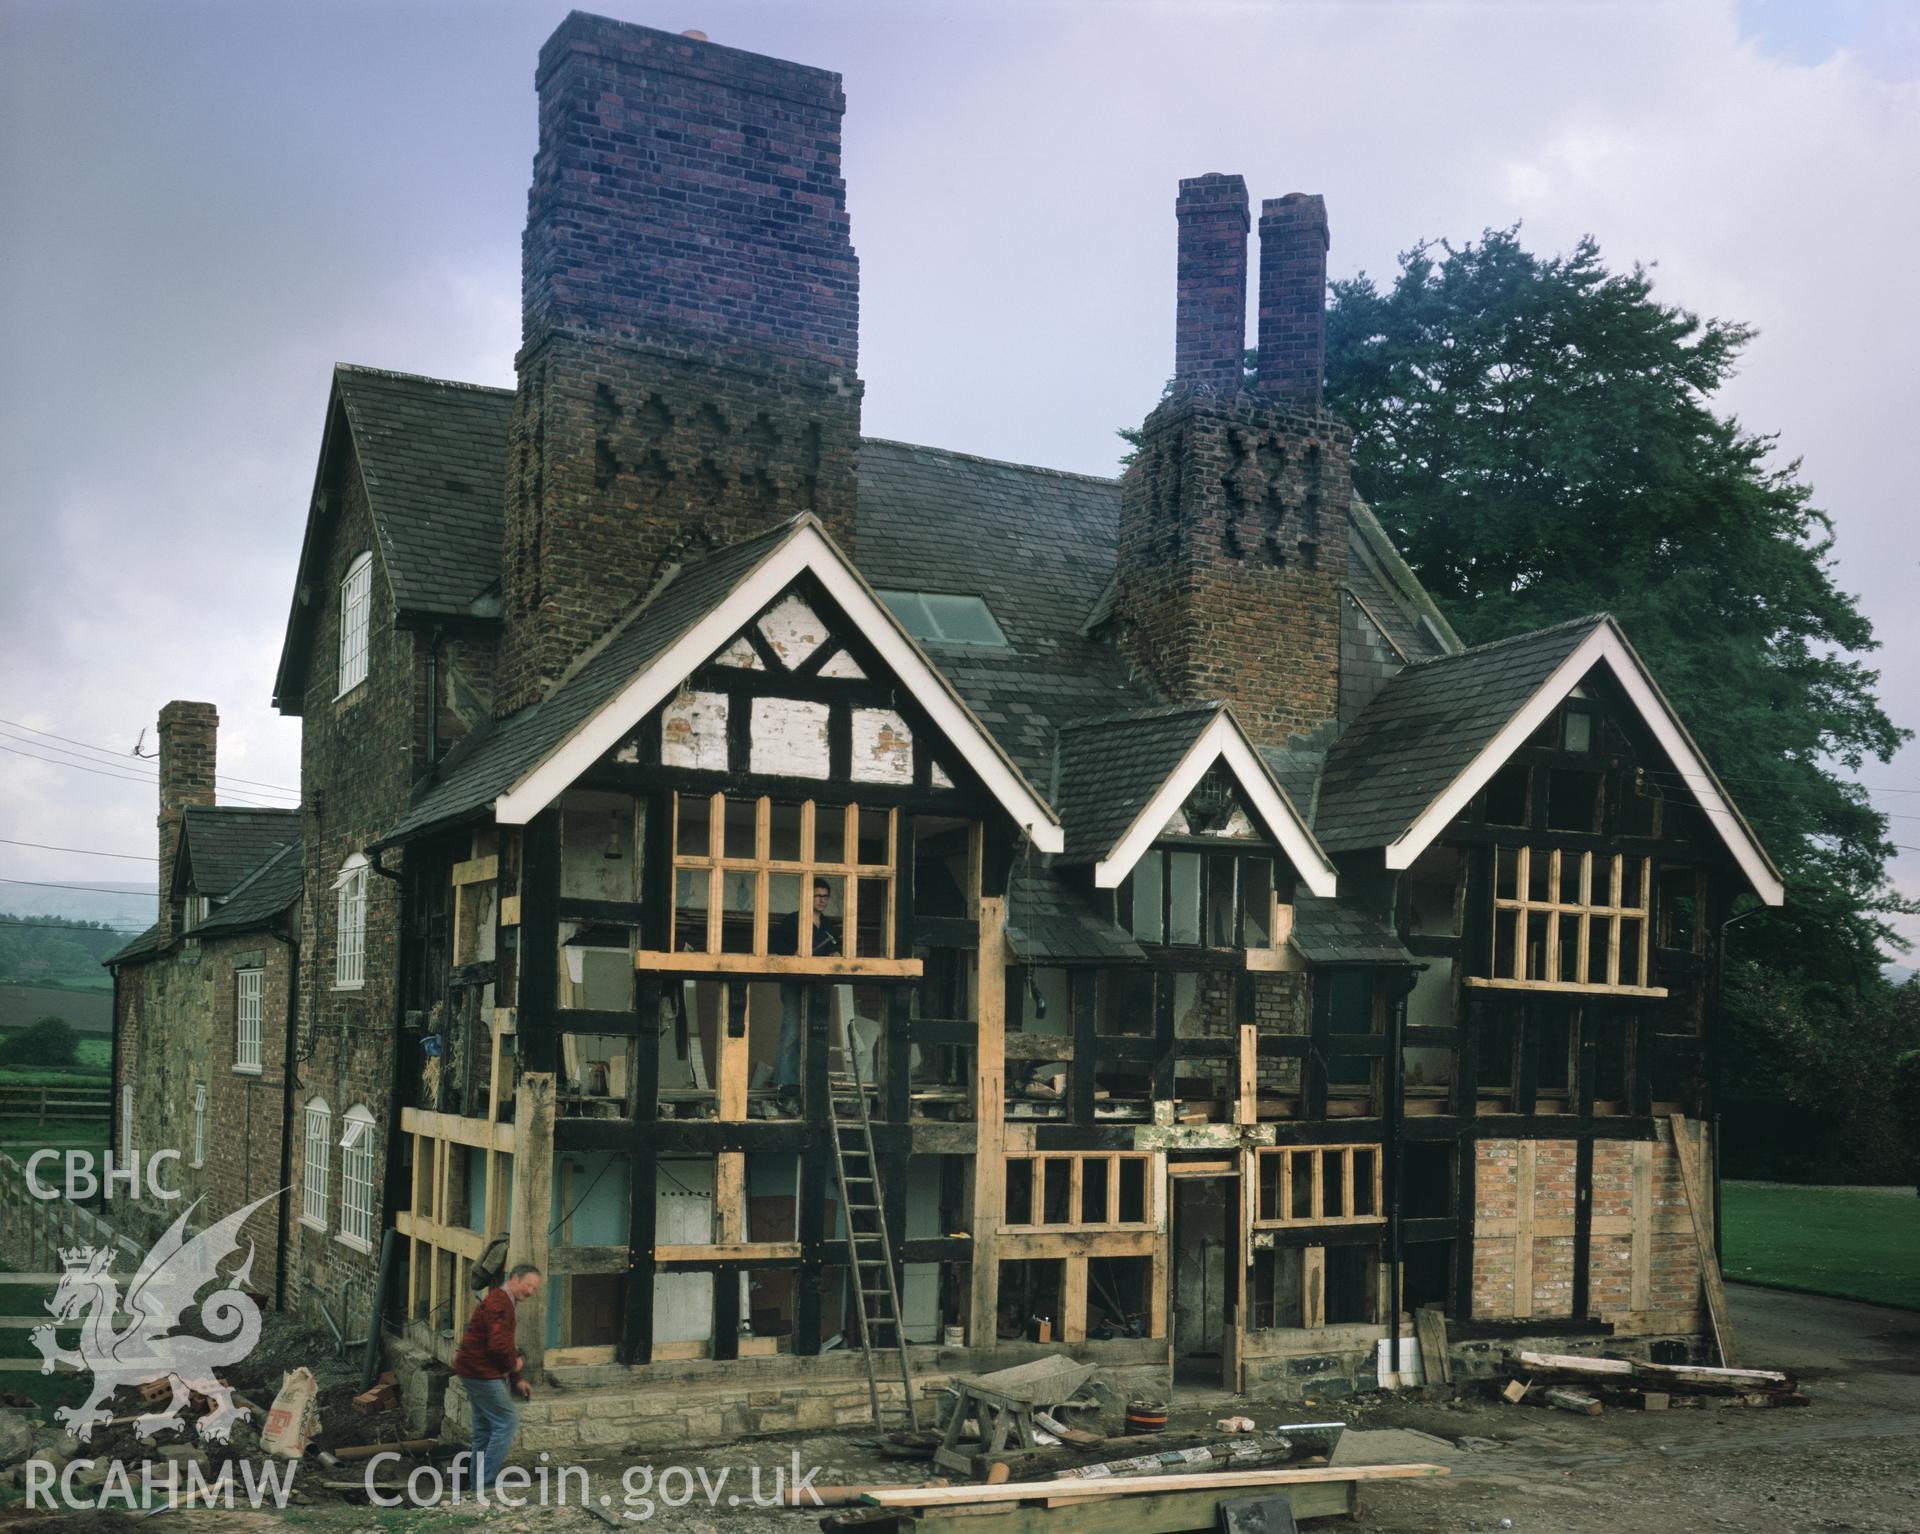 RCAHMW colour transparency showing a view of Hafod y Bwch, taken during building work of 1980.